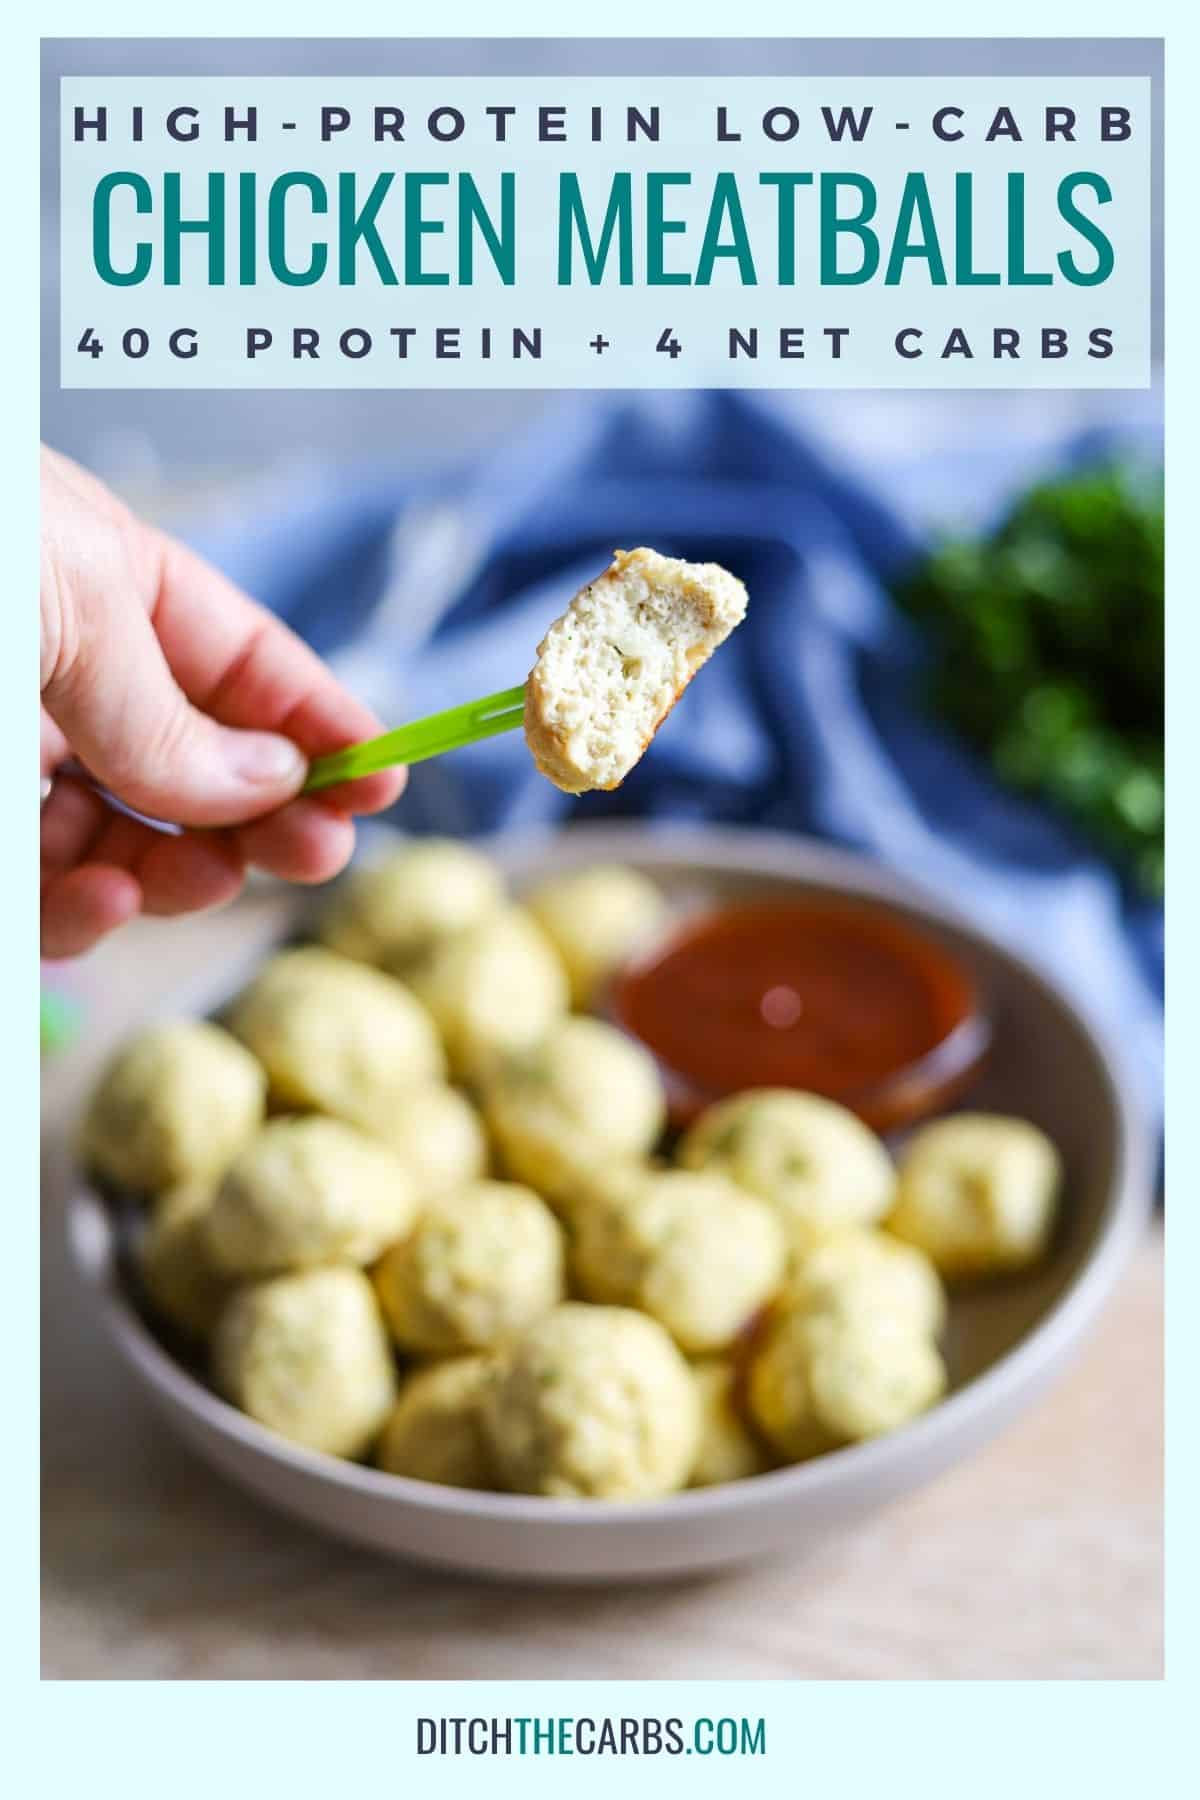 cheesy chicken meatballs high-protein low-carb (HPLC) wth sugar-free ketchup